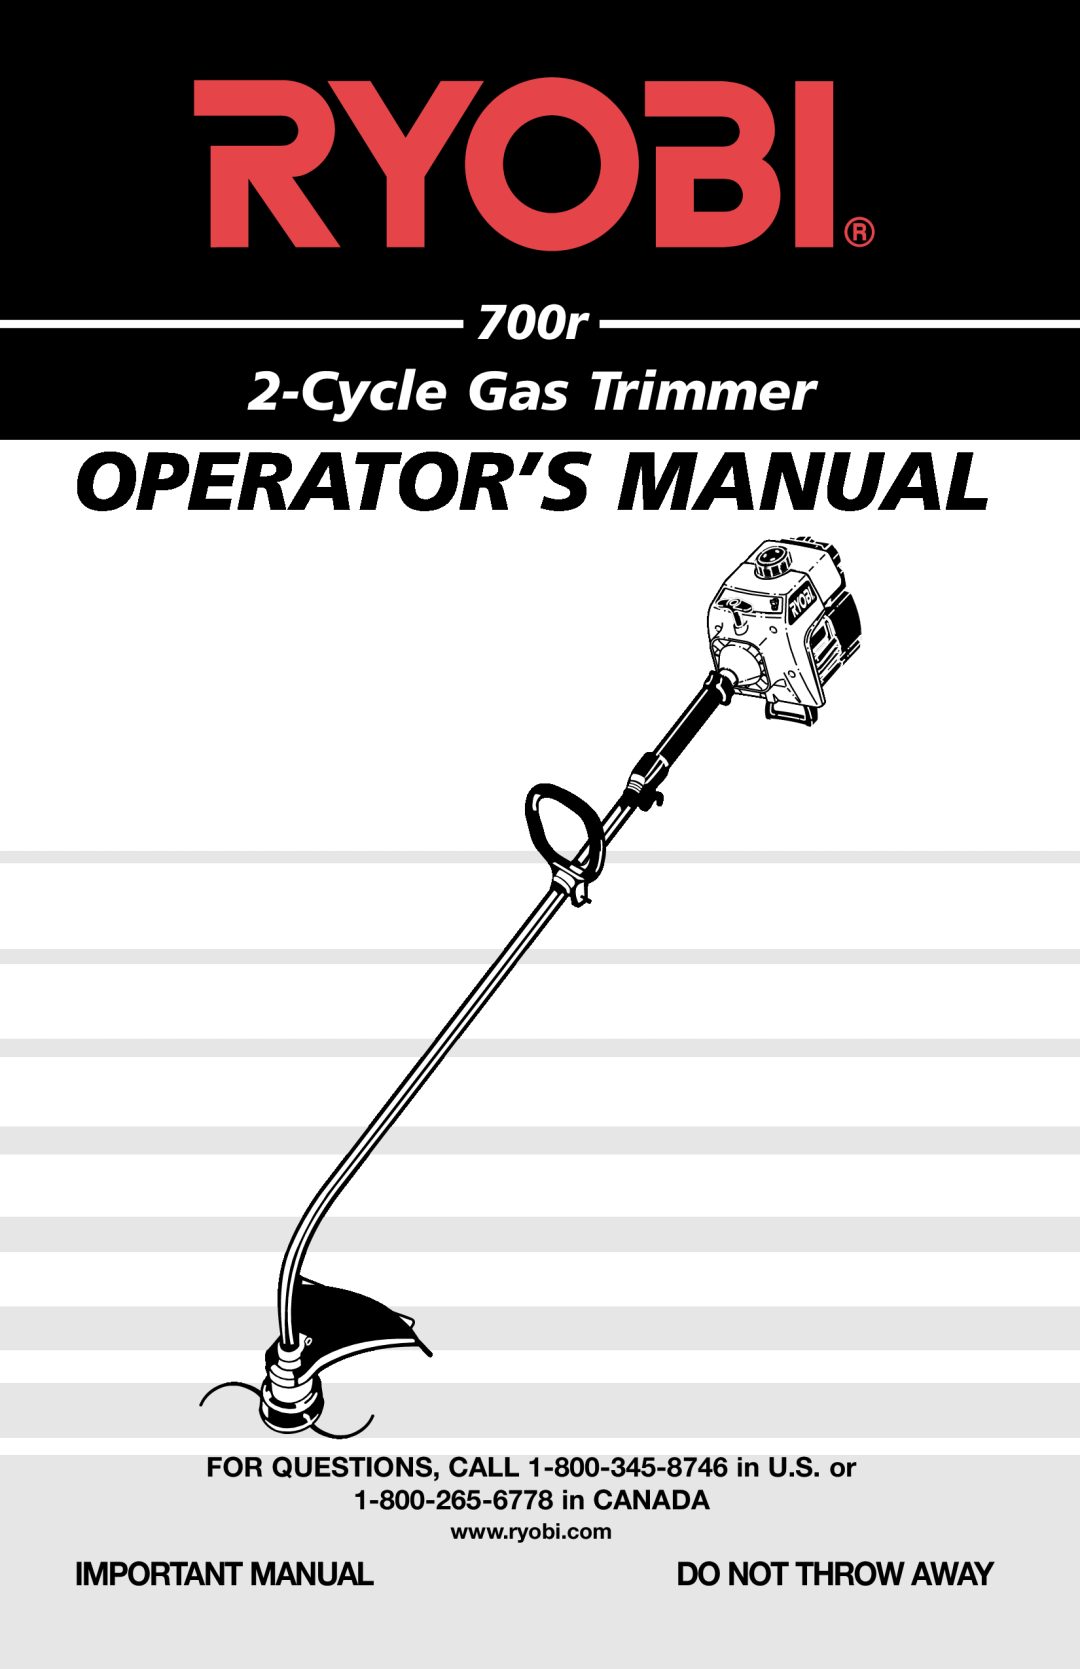 Ryobi 700r manual Important Manual, FOR QUESTIONS, CALL 1-800-345-8746 in U.S. or, Operator’S Manual, Cycle Gas Trimmer 